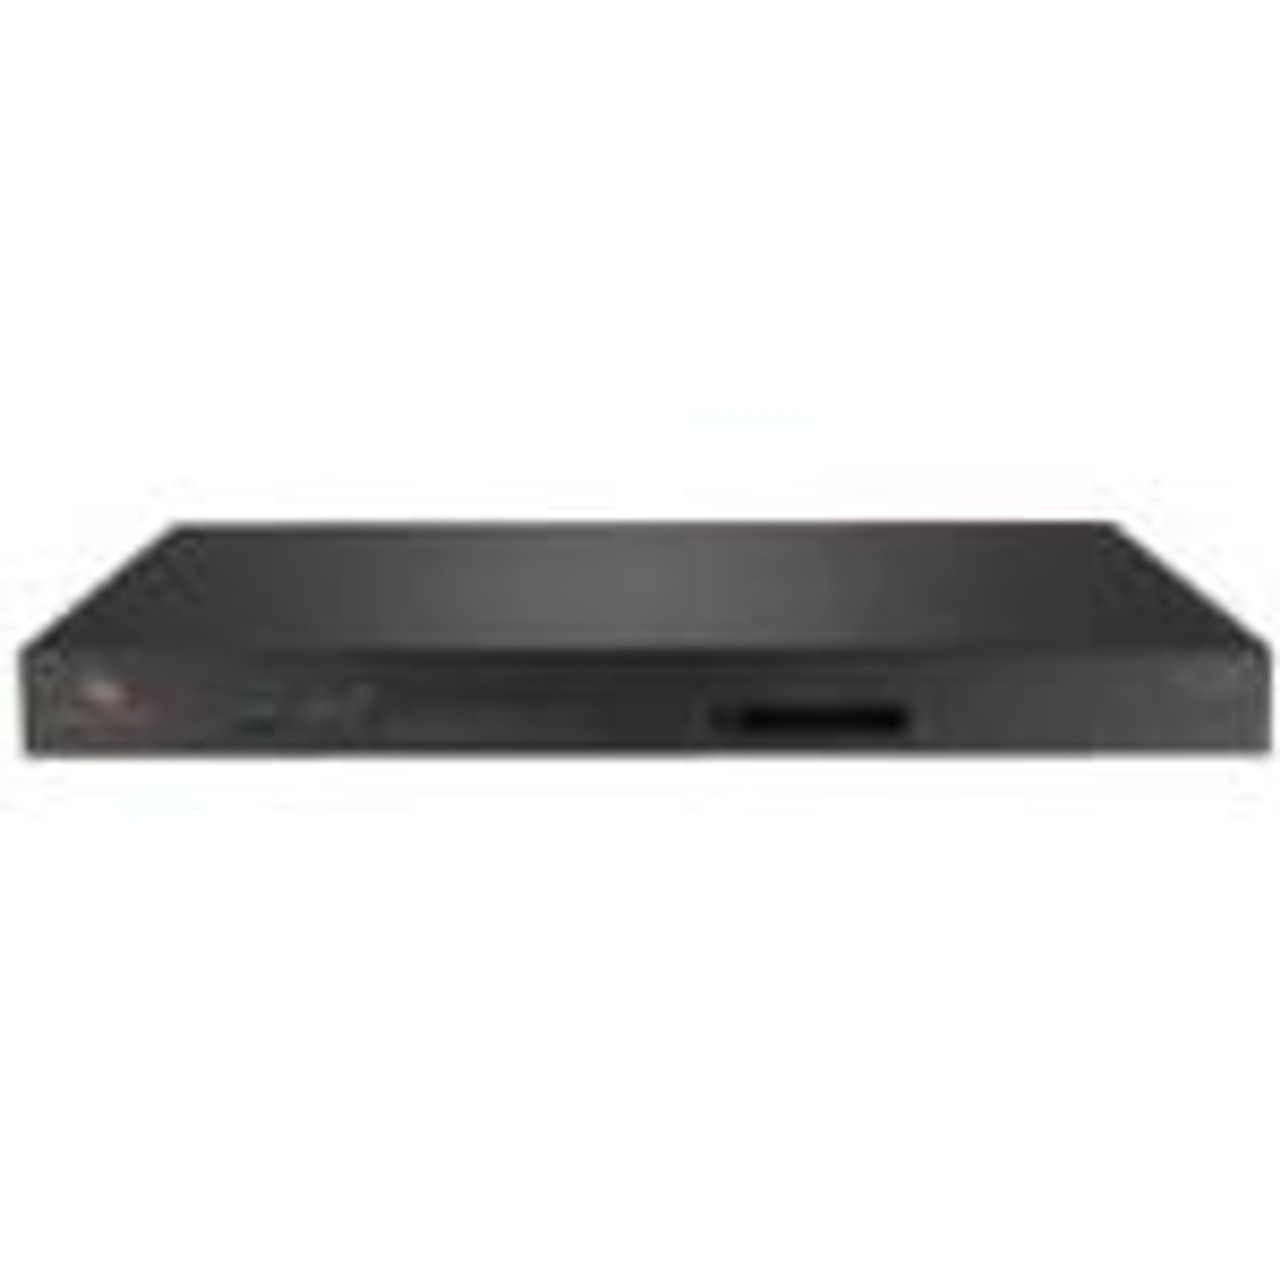 ACS6016MSAC-001 Avocent Cyclades 32-Ports ACS 6016 Console Server Plus Single AC Power Supply Built-In Modem